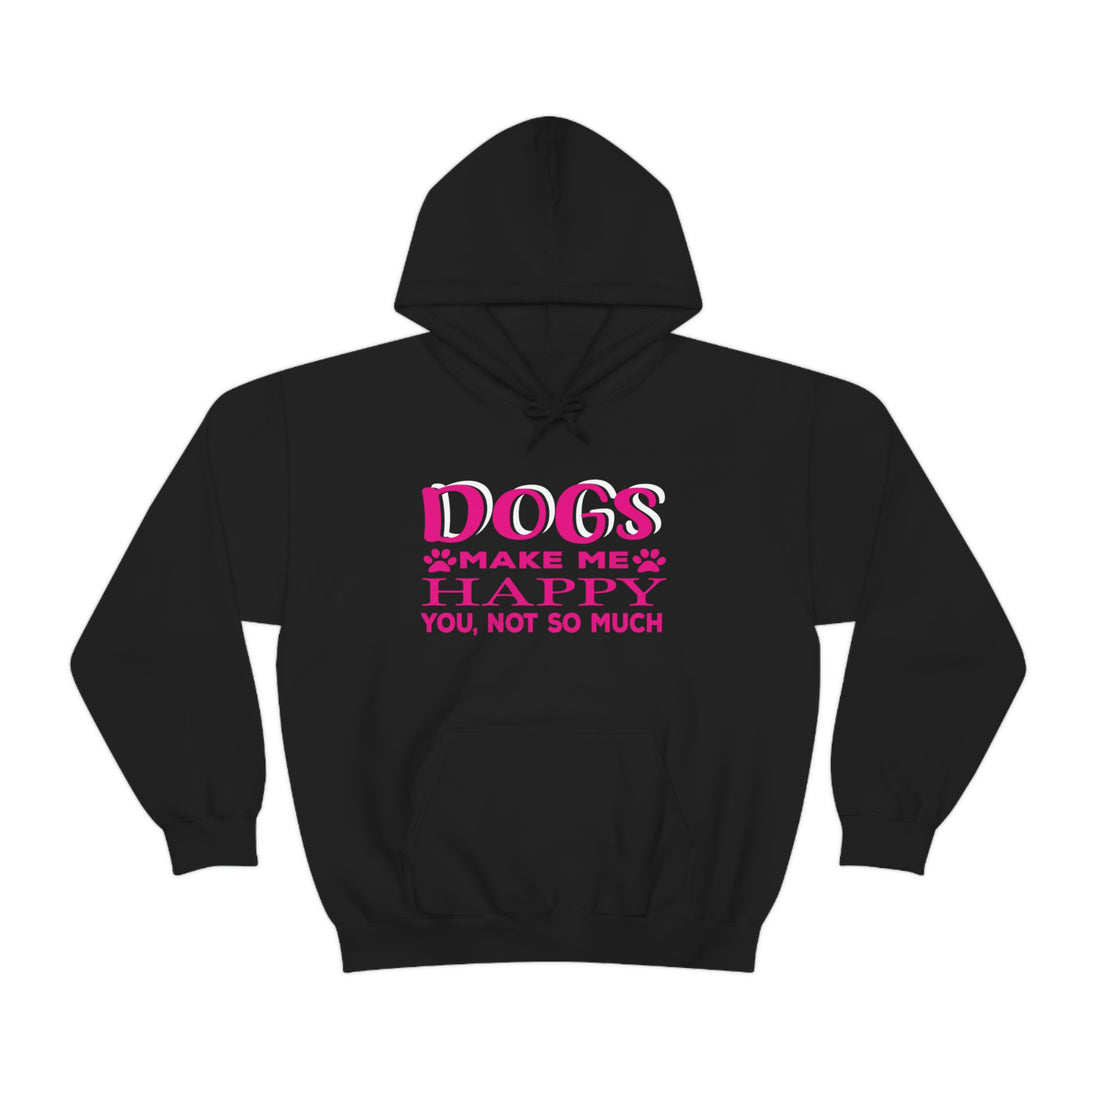 Dogs Make Me Happy You Not So Much - Unisex Heavy Blend™ Hooded Sweatshirt